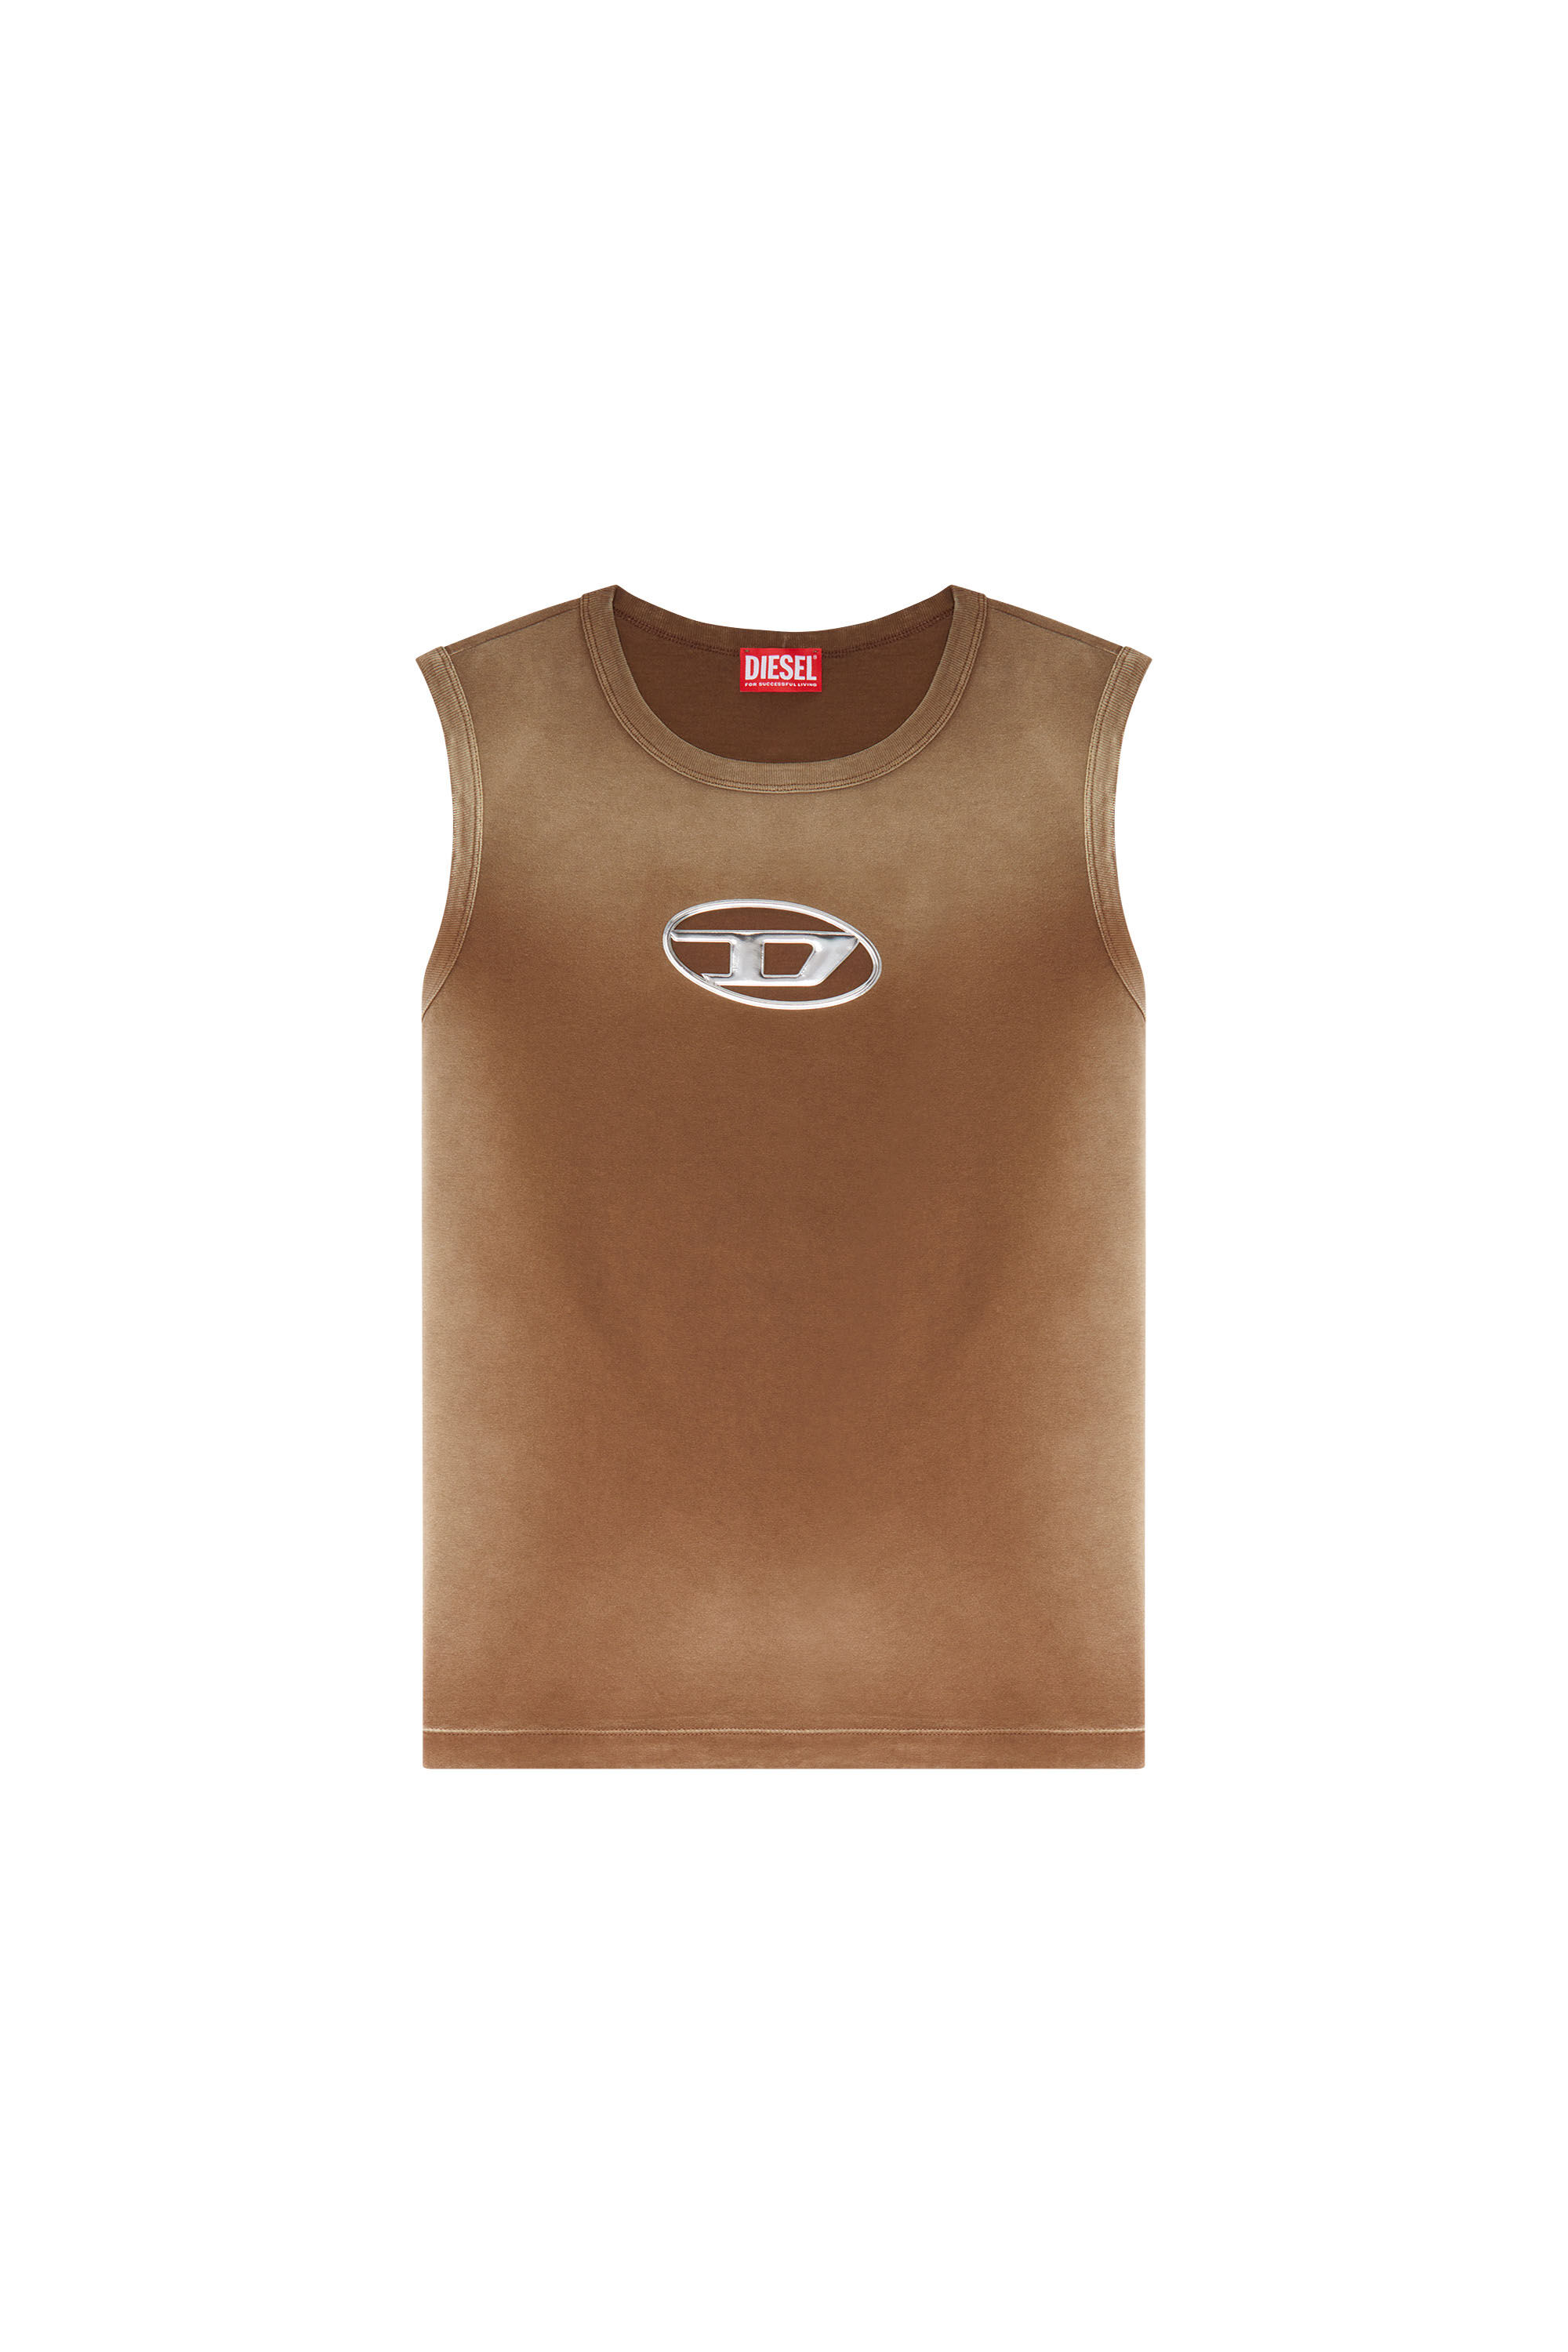 T-BRICO Faded tank top with puffy Oval D｜ブラウン｜メンズ｜DIESEL